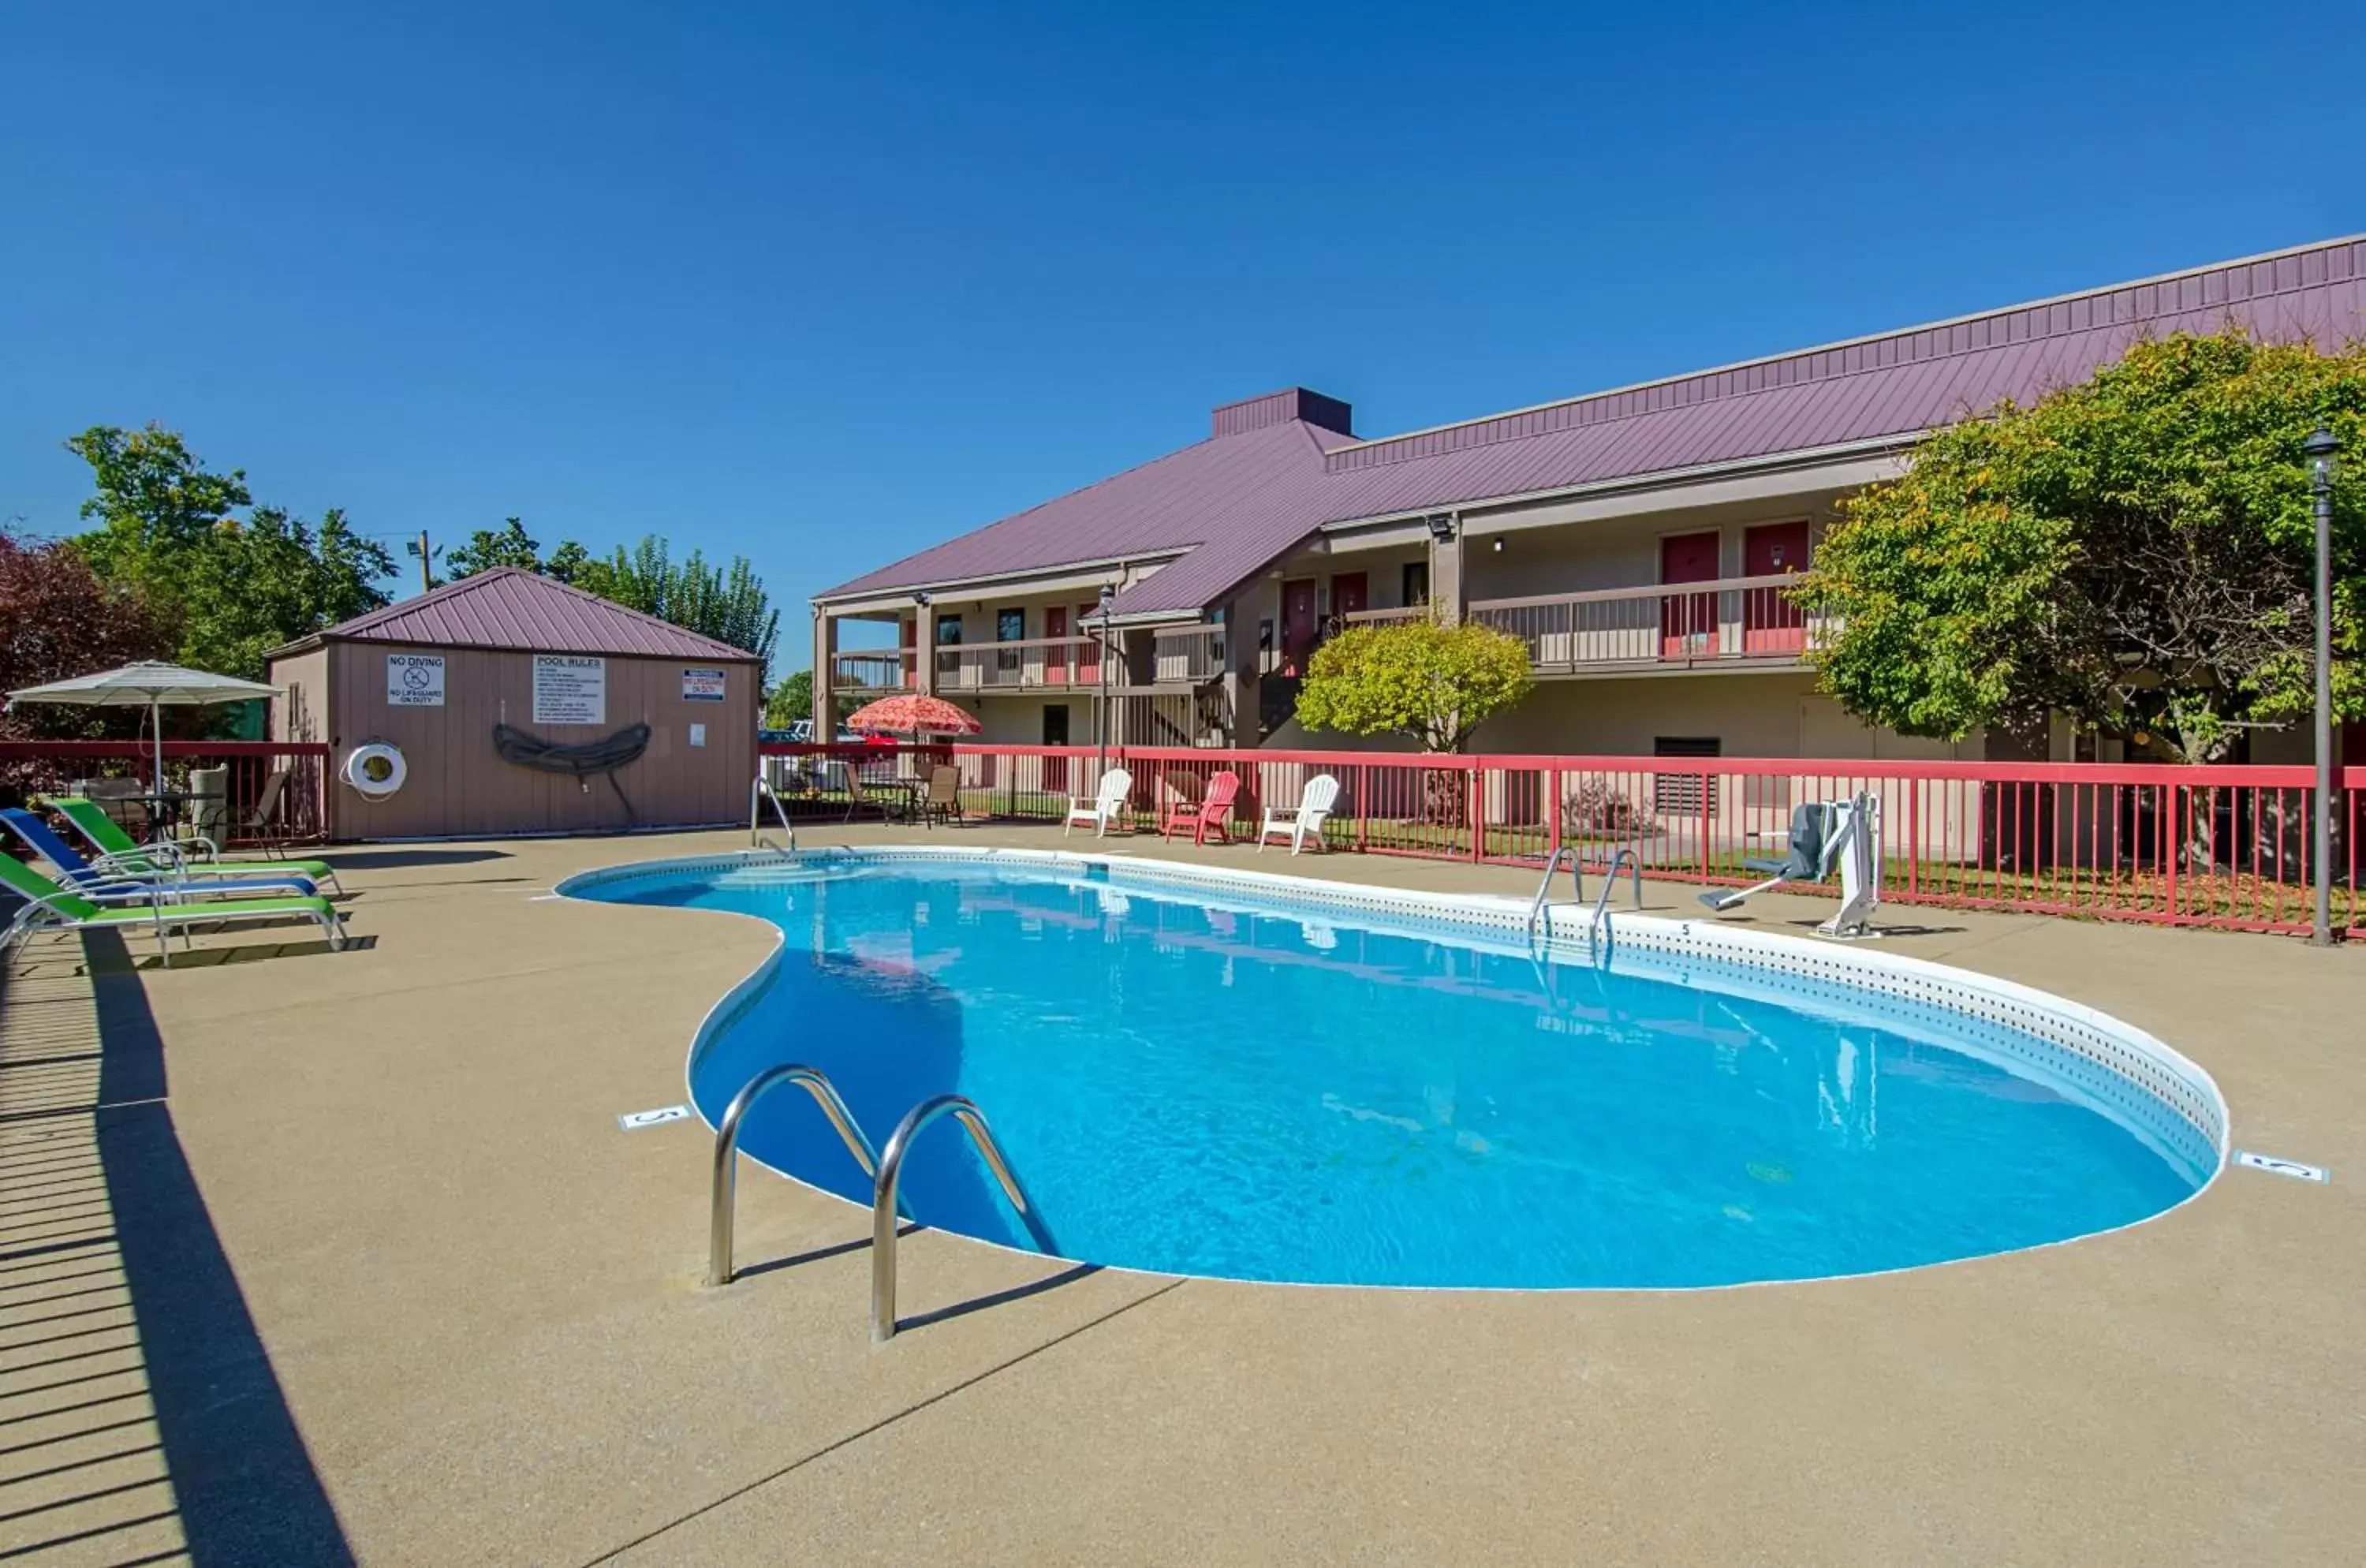 Swimming pool, Property Building in Red Roof Inn Kingsport